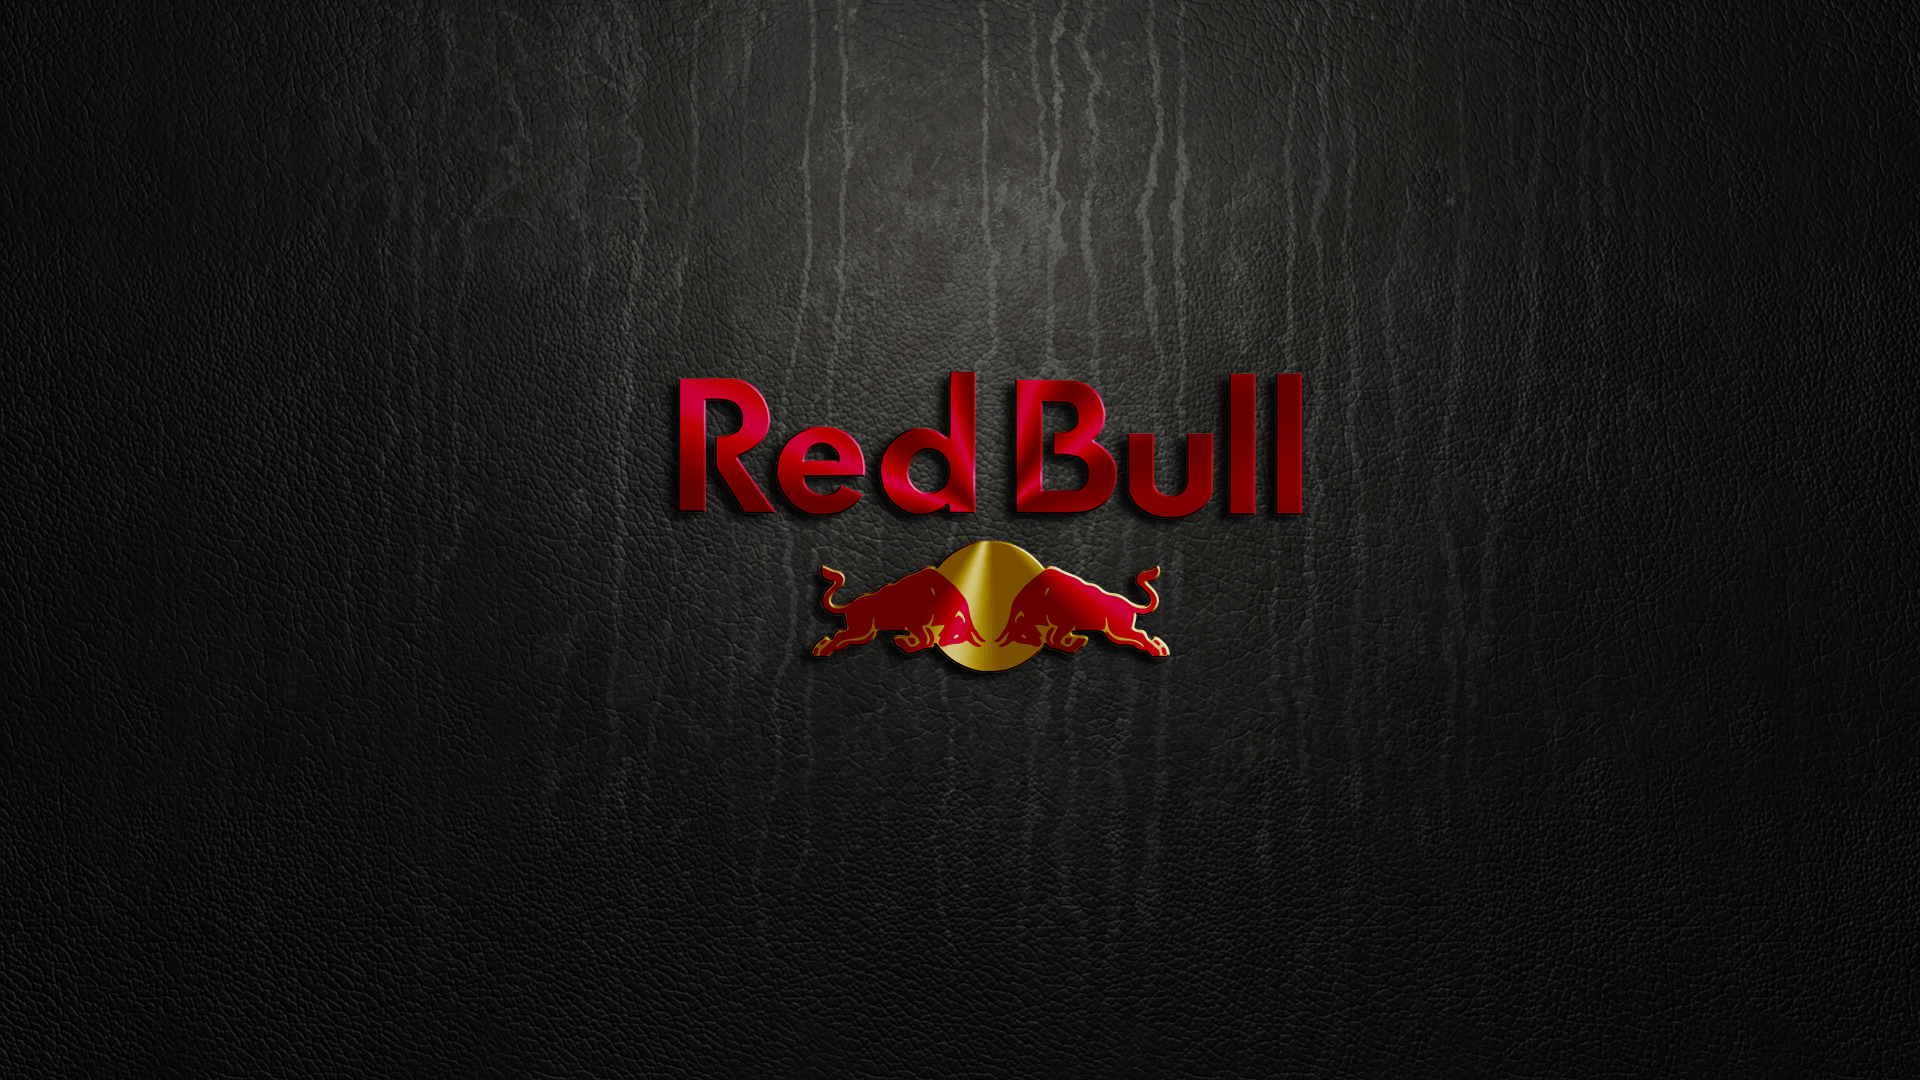 1920x1080 Red Bull Wallpapers